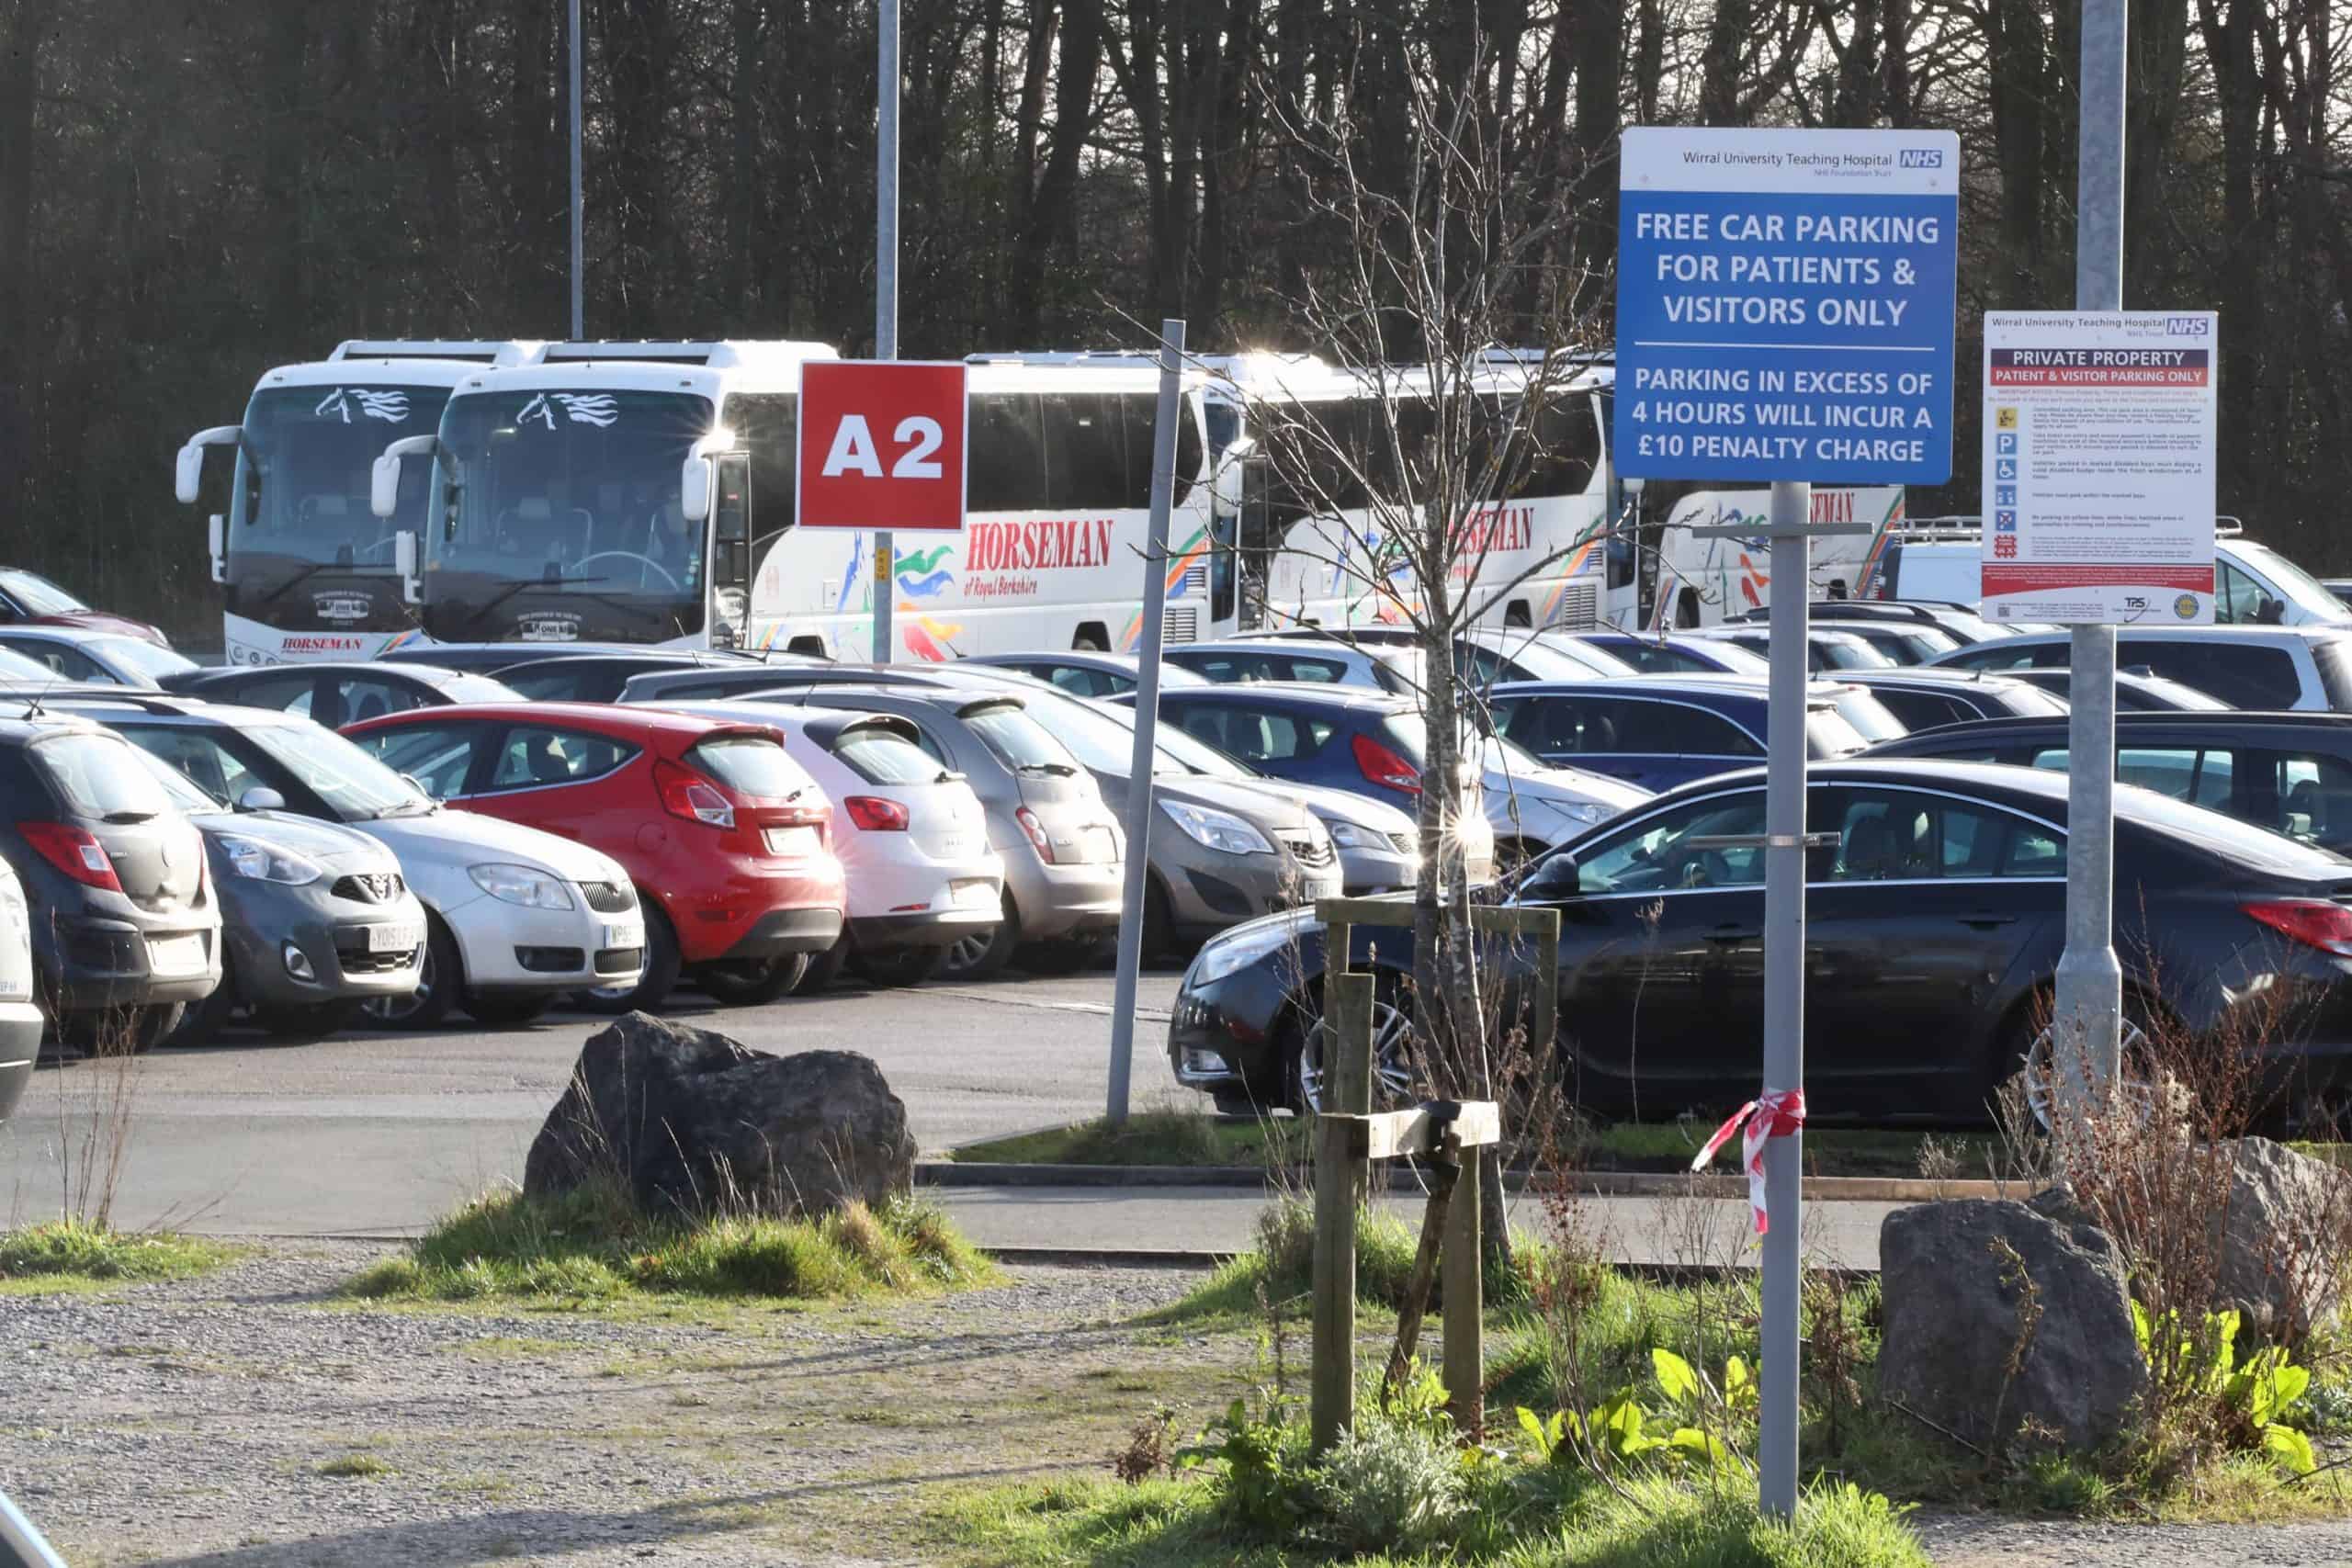 Your move, Saj: Scotland permanently scraps hospital parking charges